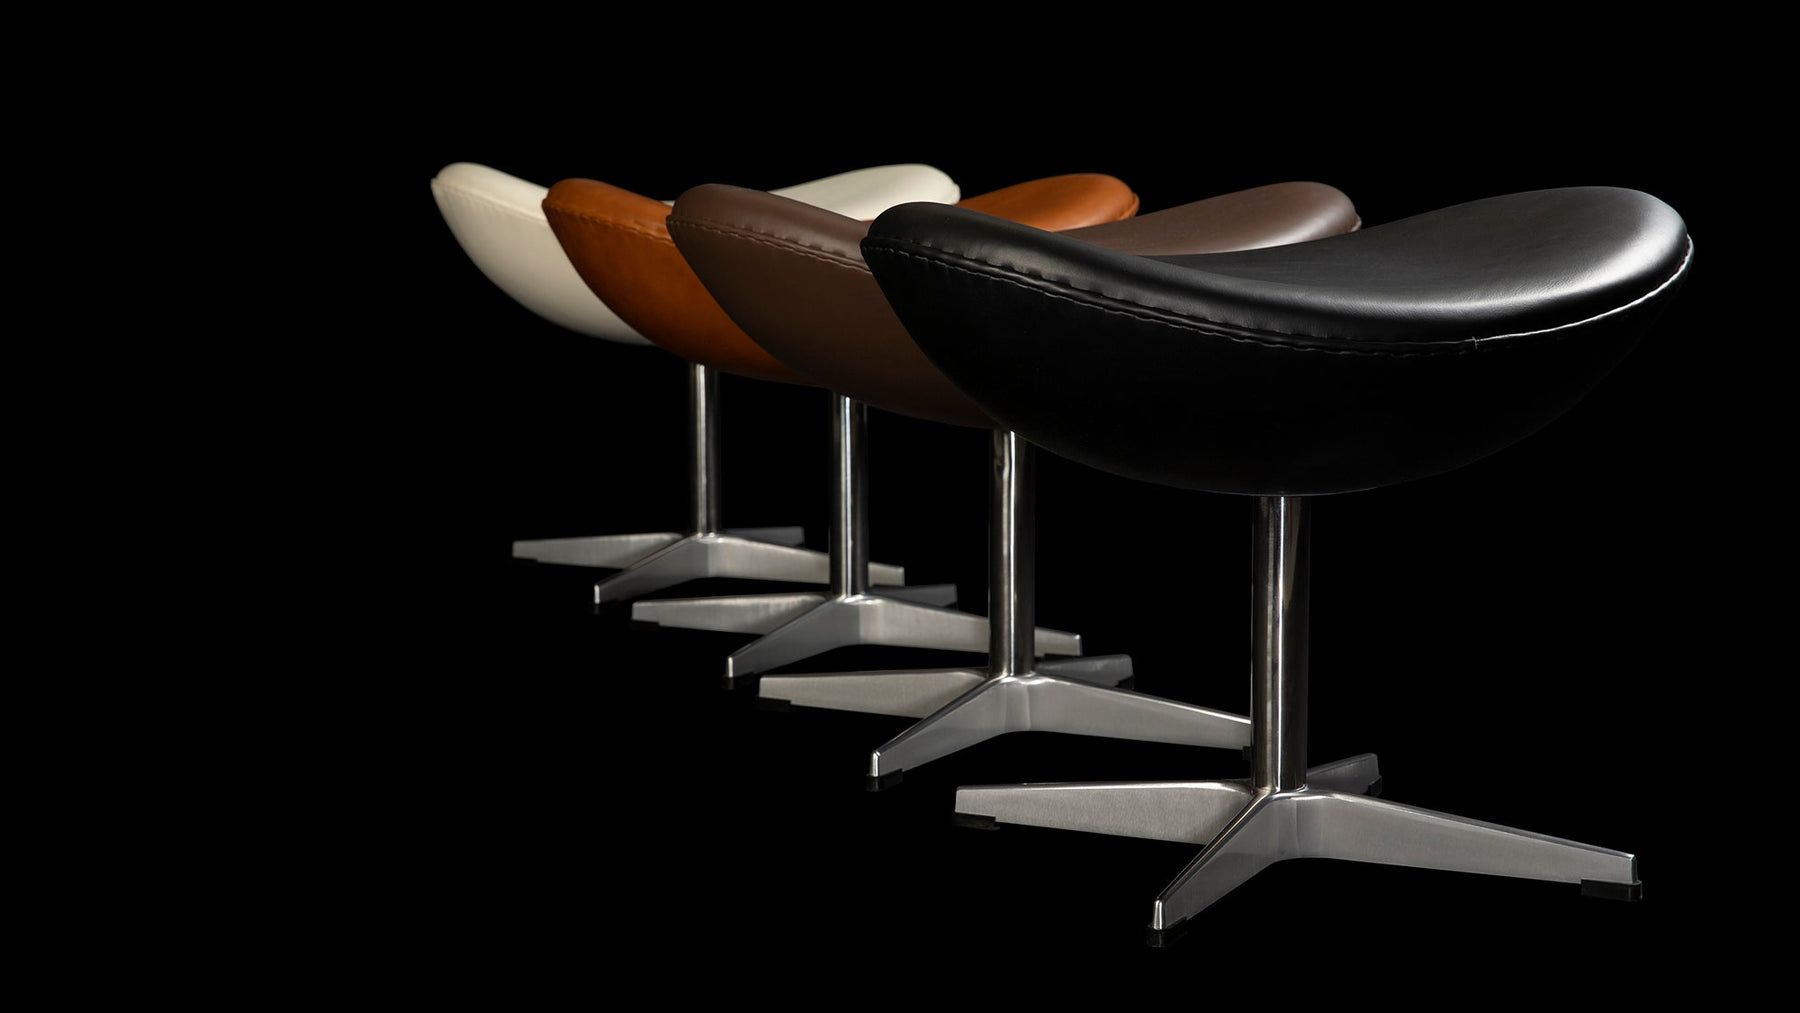 Set in a cascade of White, Tan, Brown & Black leather, the Arne Jacobsen Ottoman Stools look majestic atop a dark black background in this banner image